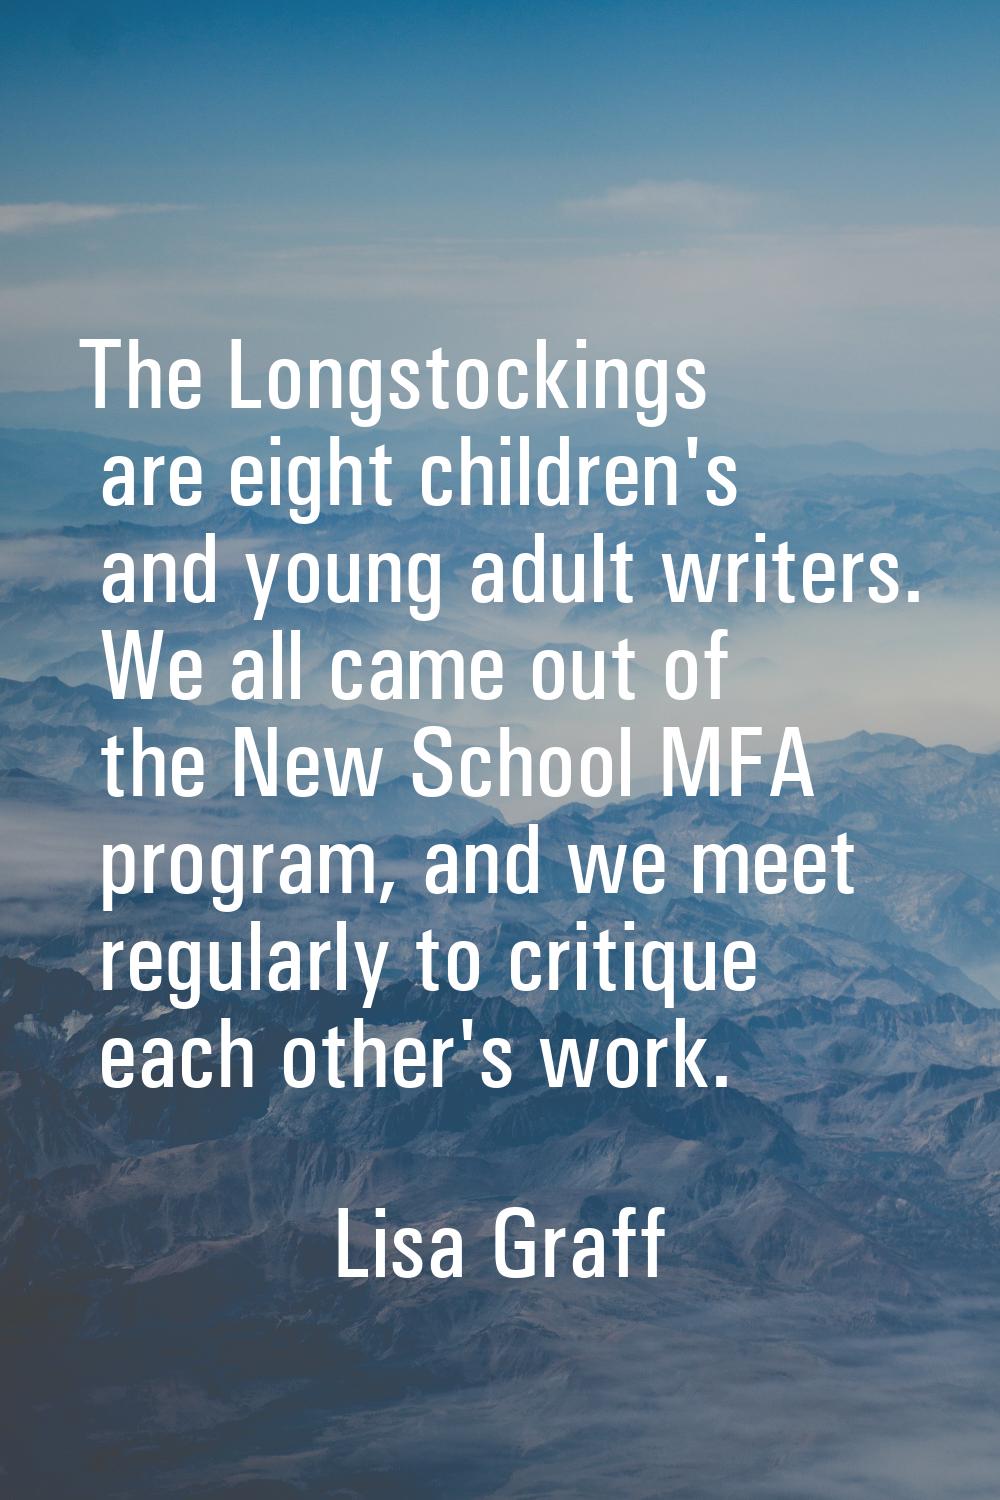 The Longstockings are eight children's and young adult writers. We all came out of the New School M